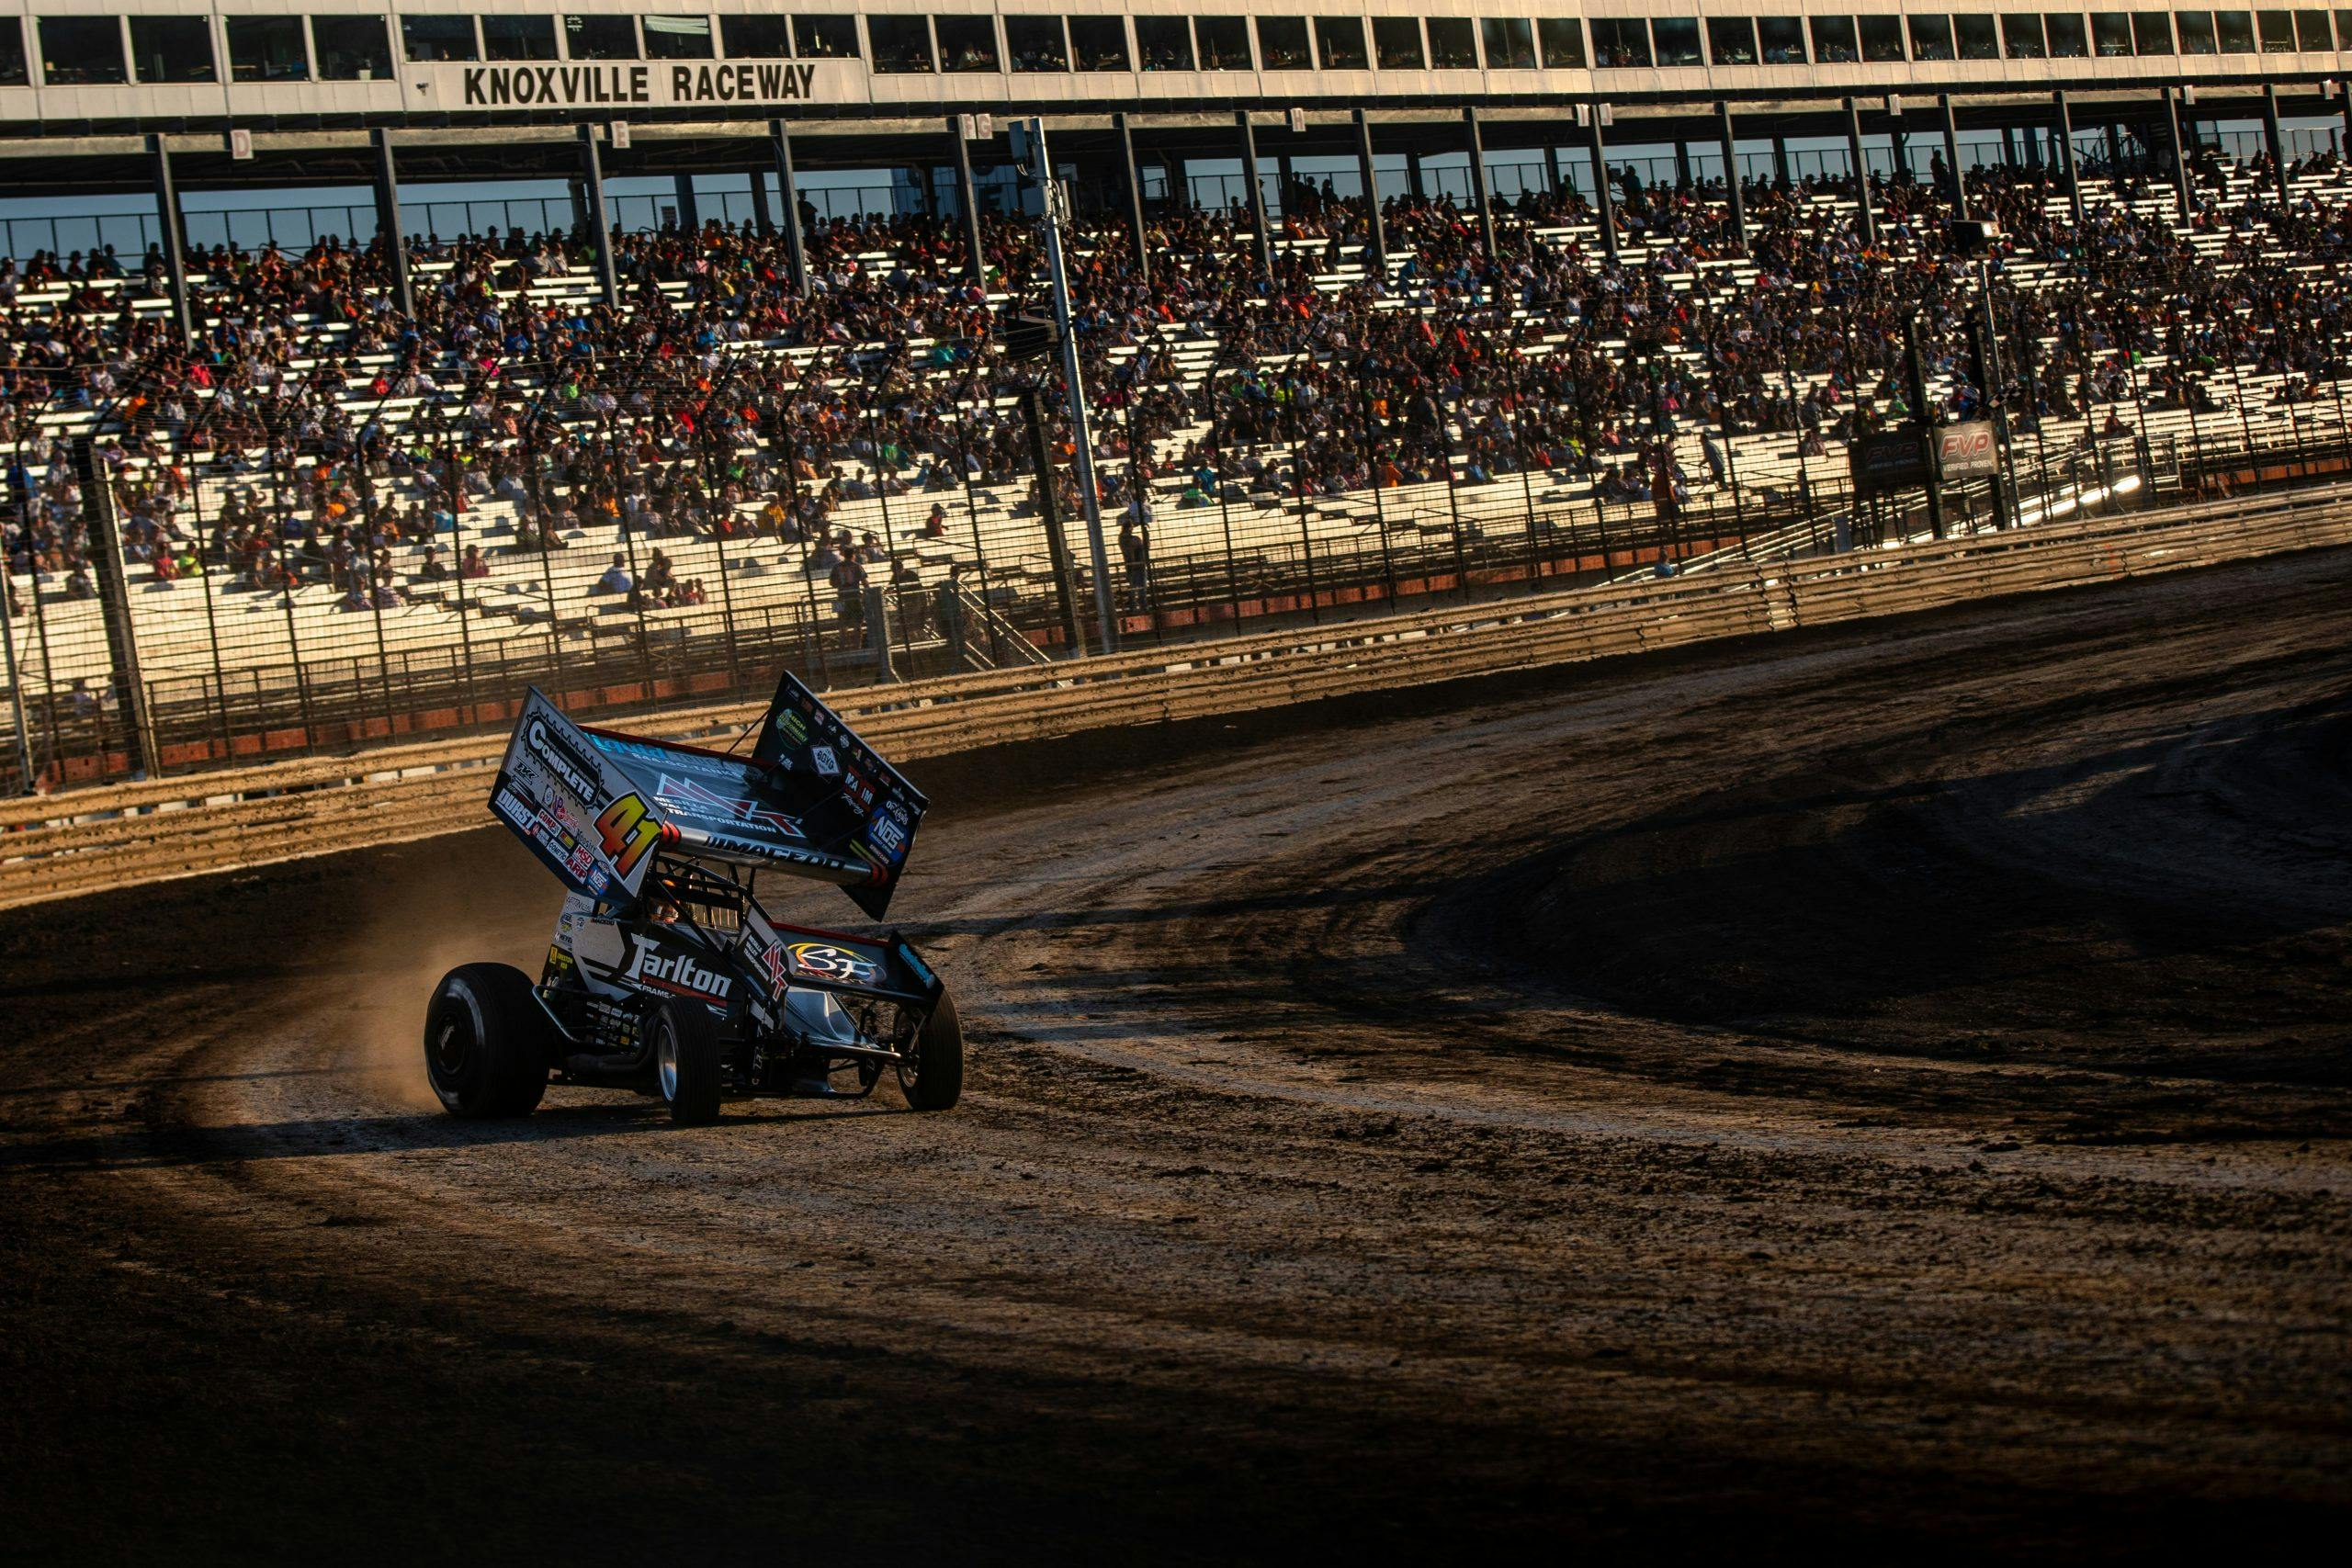 Knoxville Raceway dirt track racing action 41